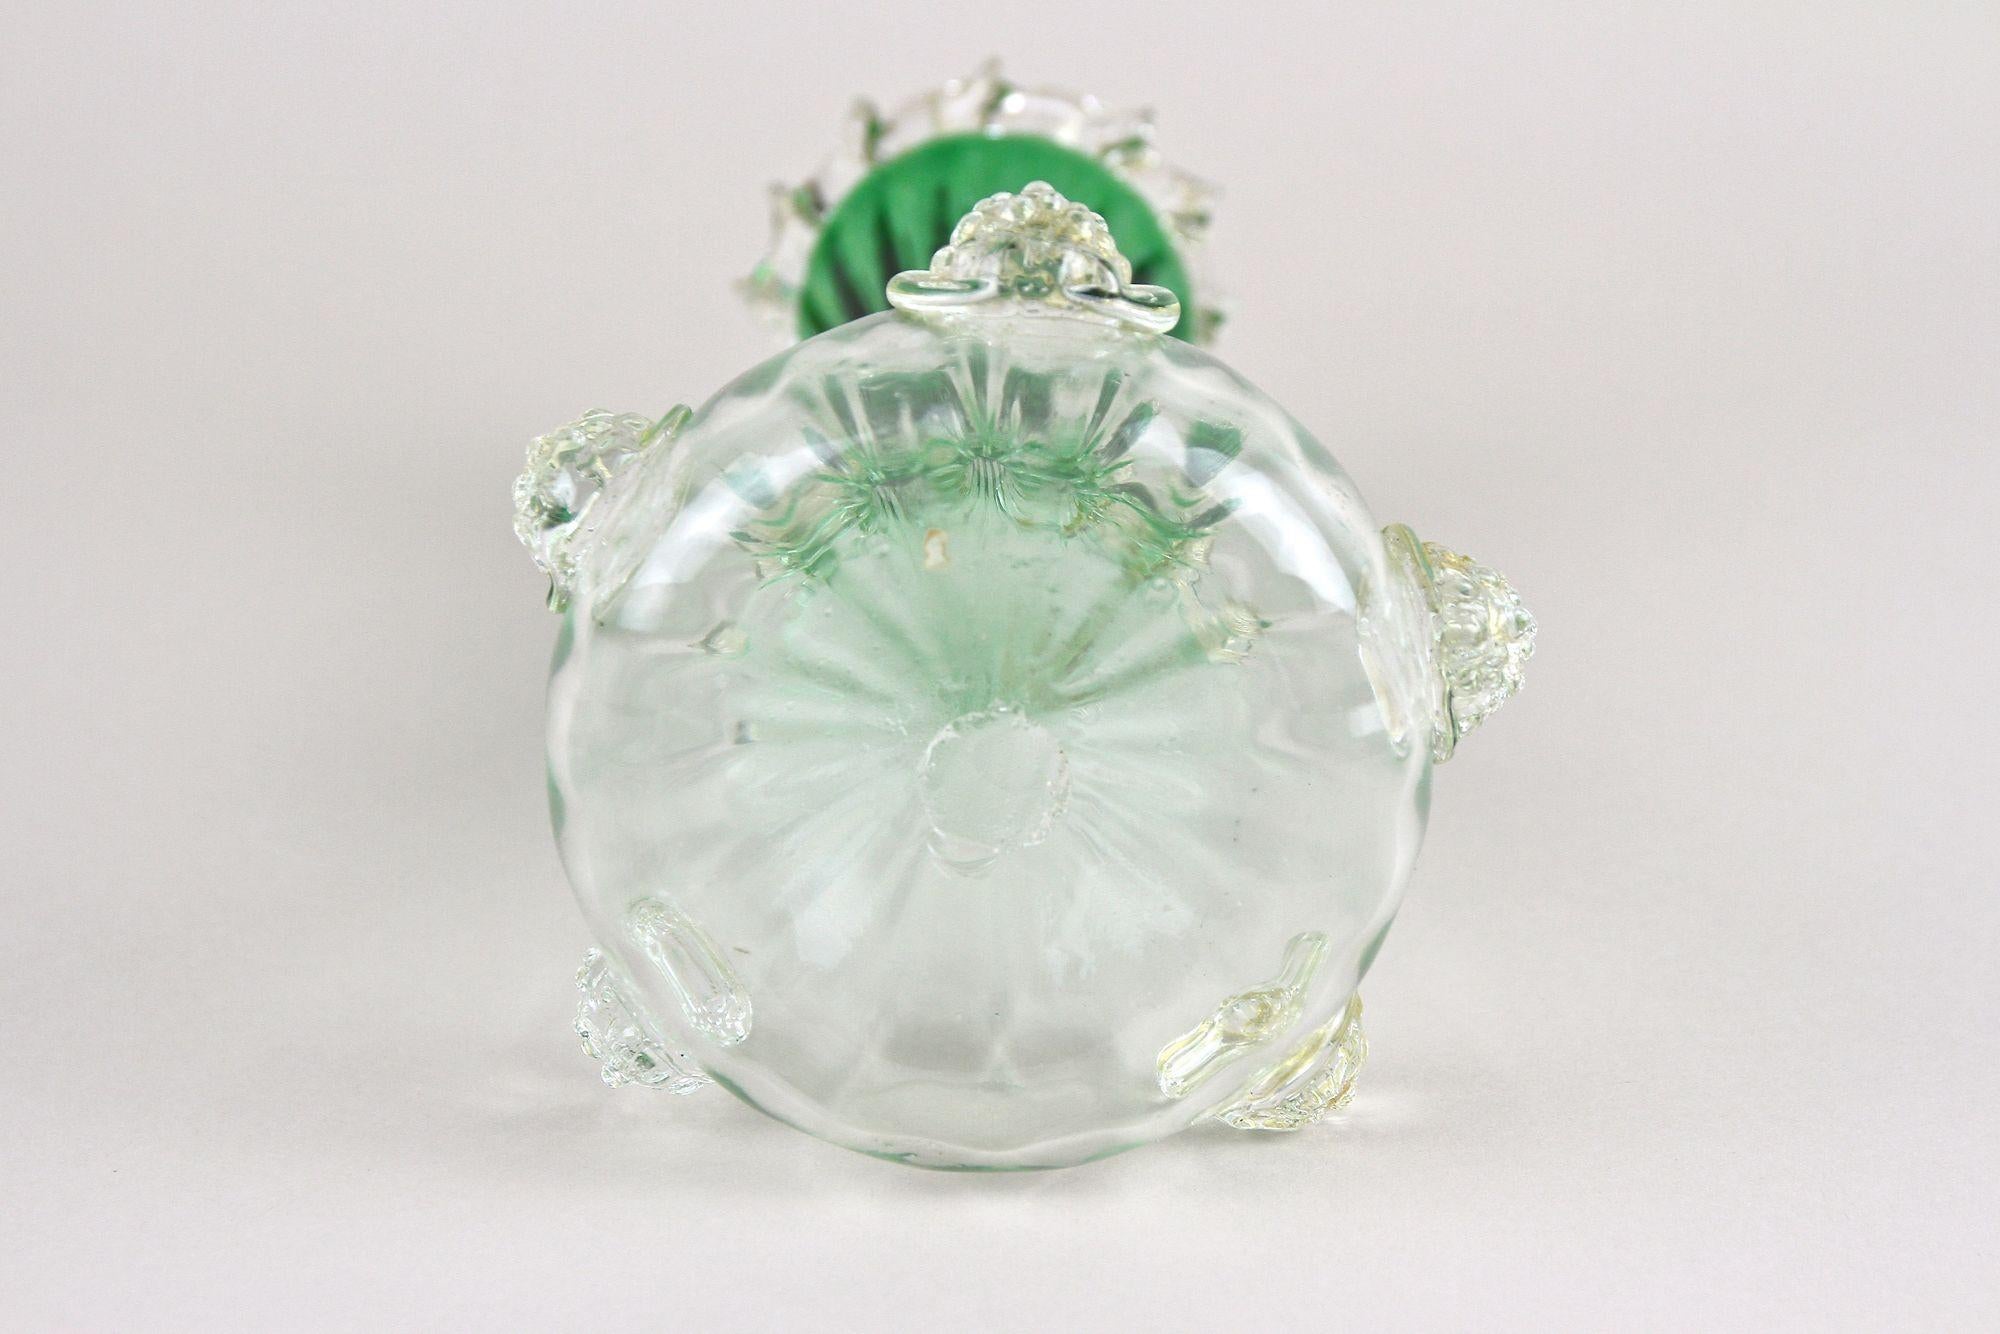 Green/ White Murano Glass Vase With 24k Gold Flakes by Fratelli Toso, IT ca 1930 For Sale 6